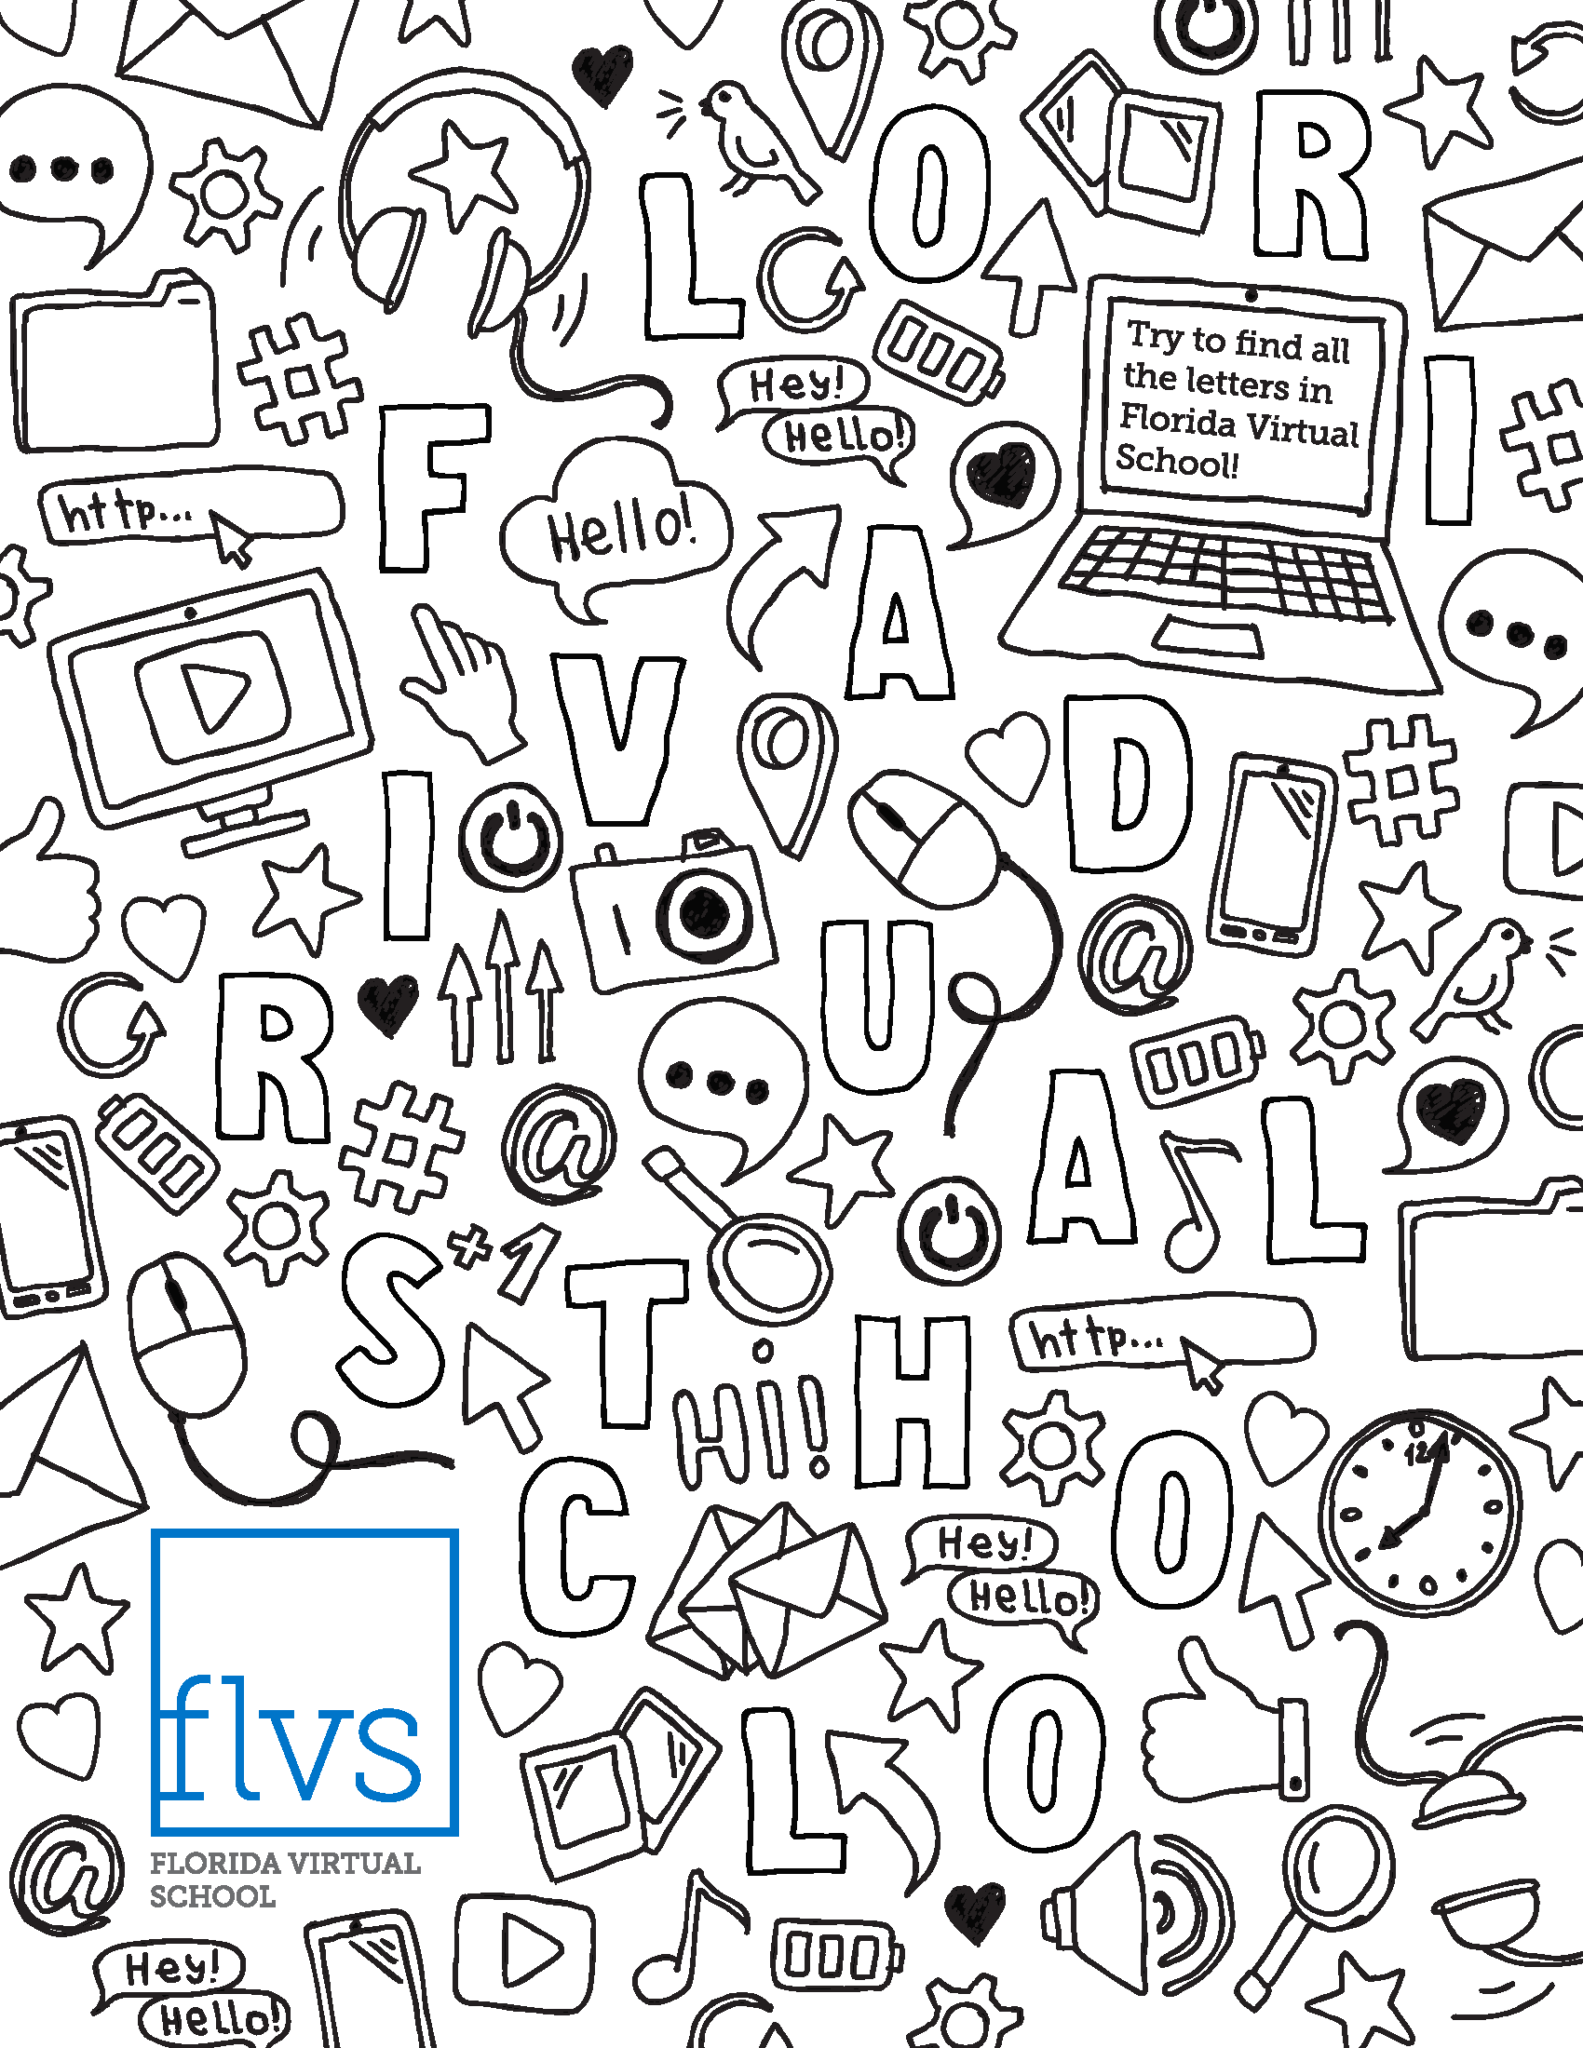 New FLVS Printables Now Available | The Virtual Voice